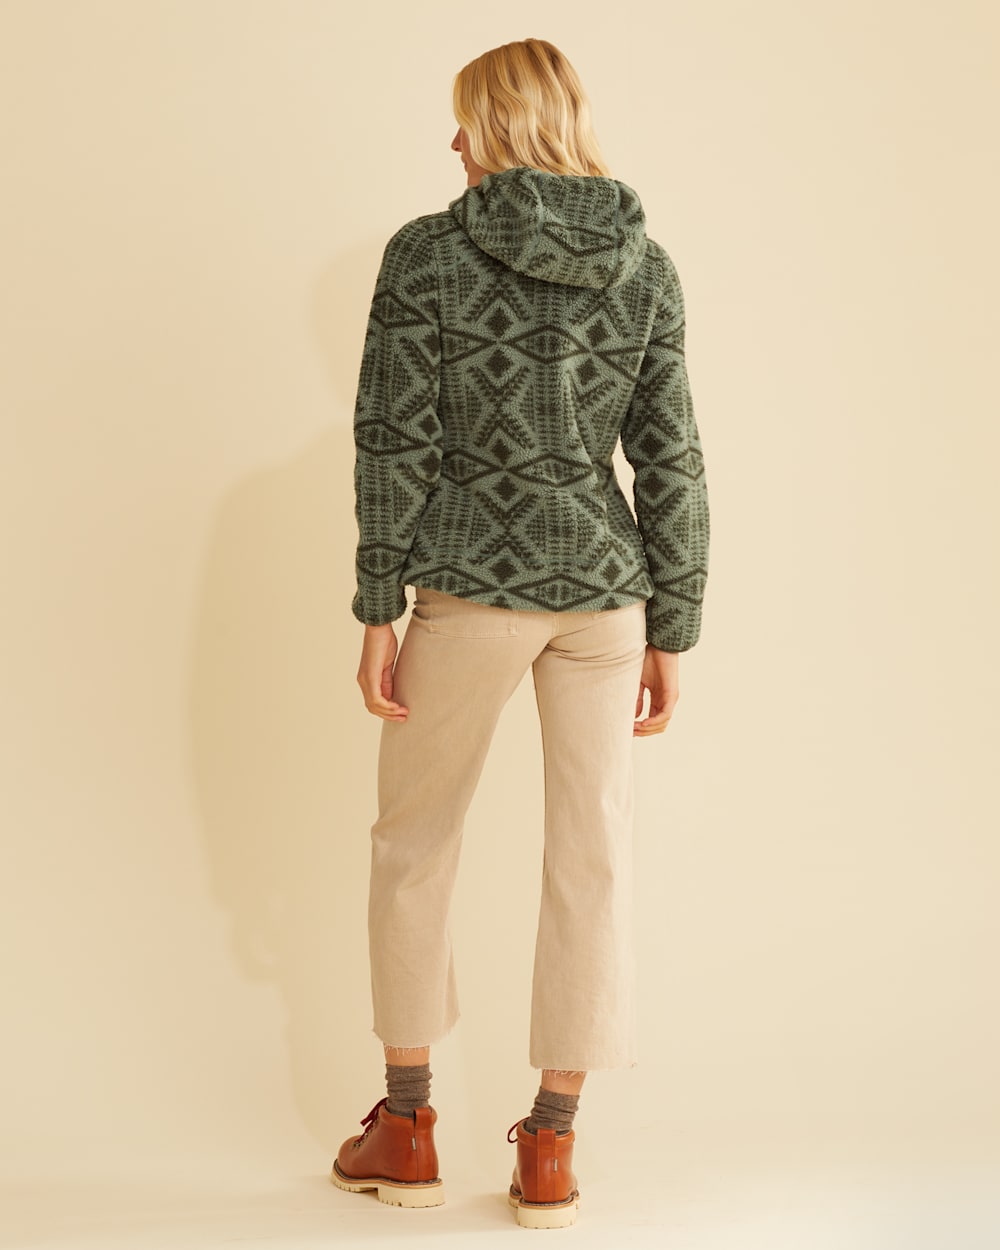 ALTERNATE VIEW OF WOMEN'S FLEECE HOODED JACKET IN MOSS/FOREST DIAMOND RIVER image number 3